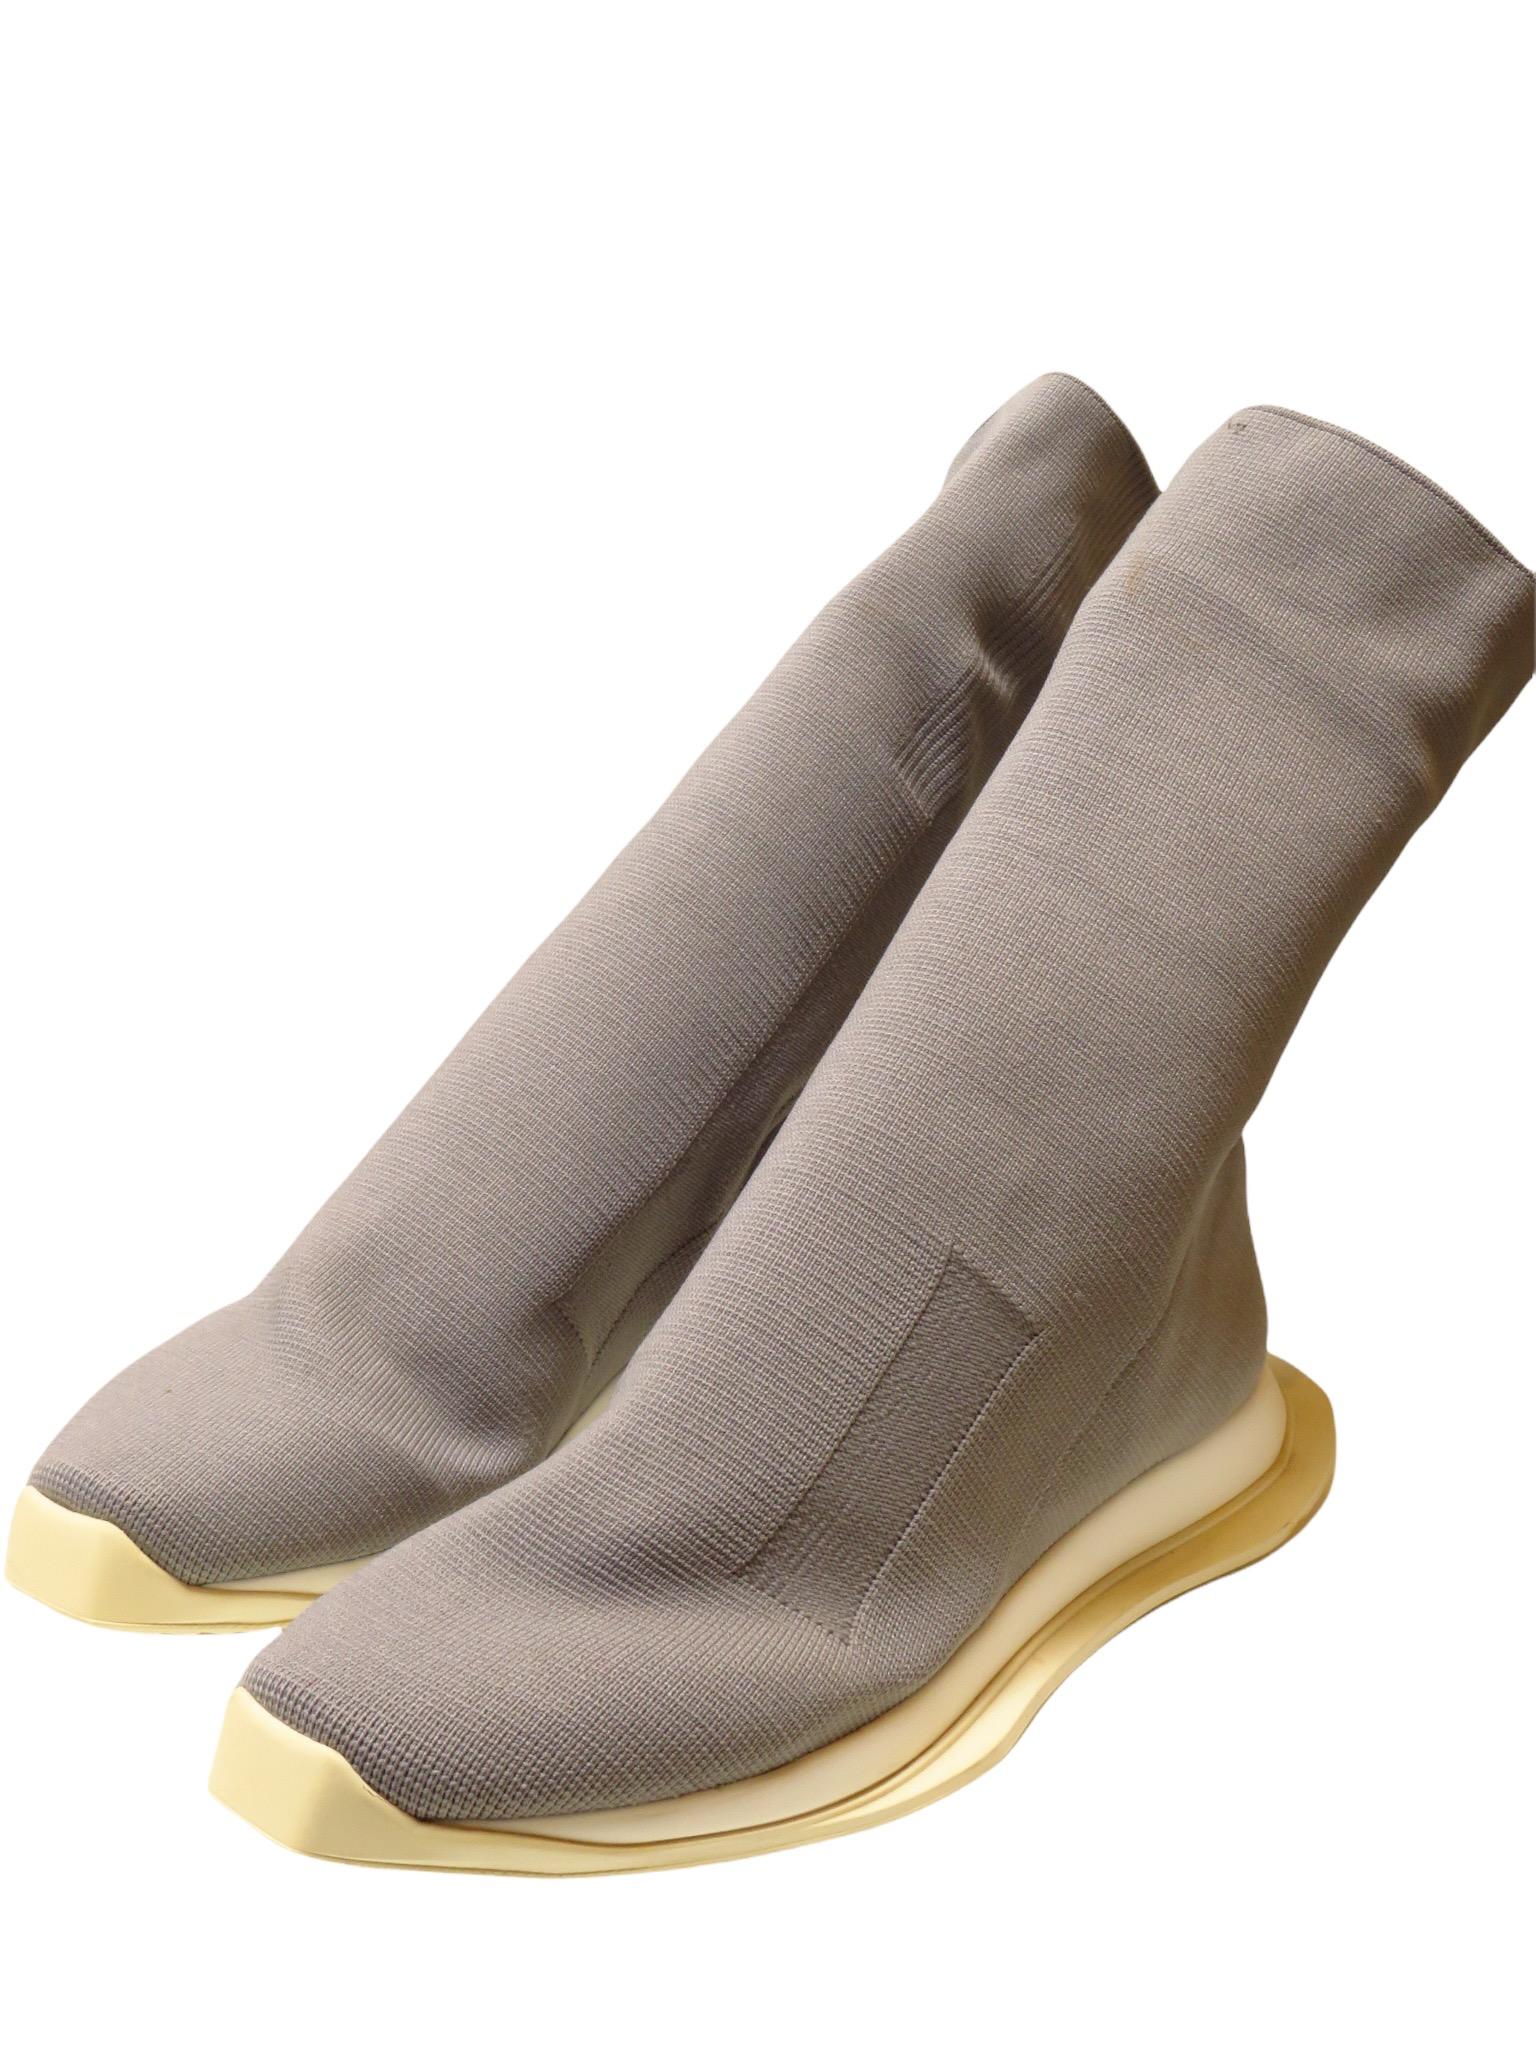 Blue stretch fabric runner low sock boots from Rick Owens DRKSHDW featuring a milk white athletic rubber sole, square toe and snug sock-like fit.